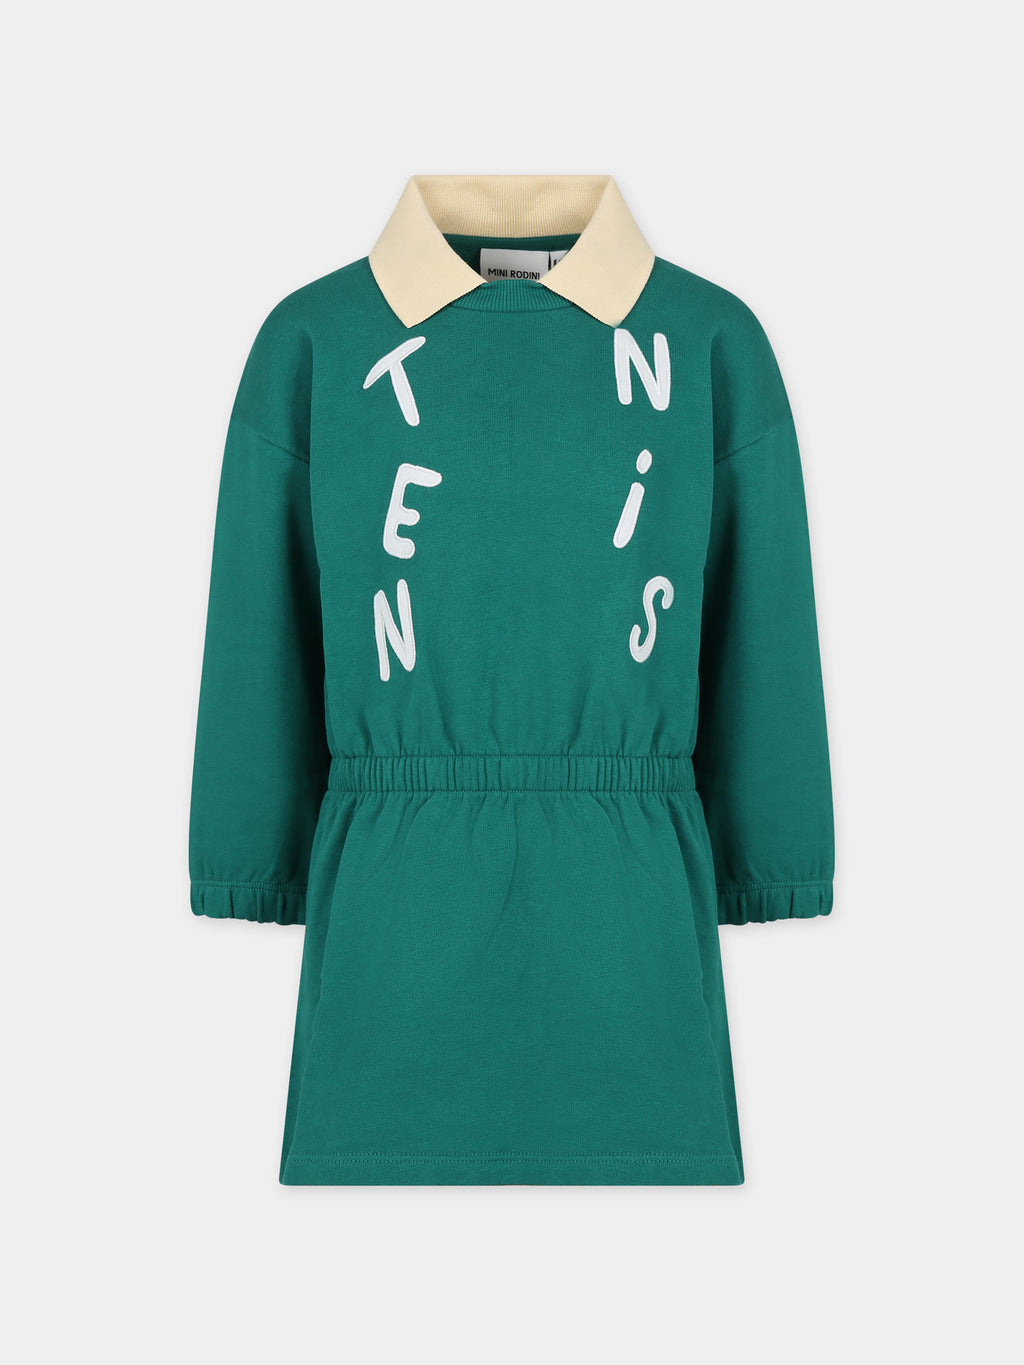 Green dress for girl with writing